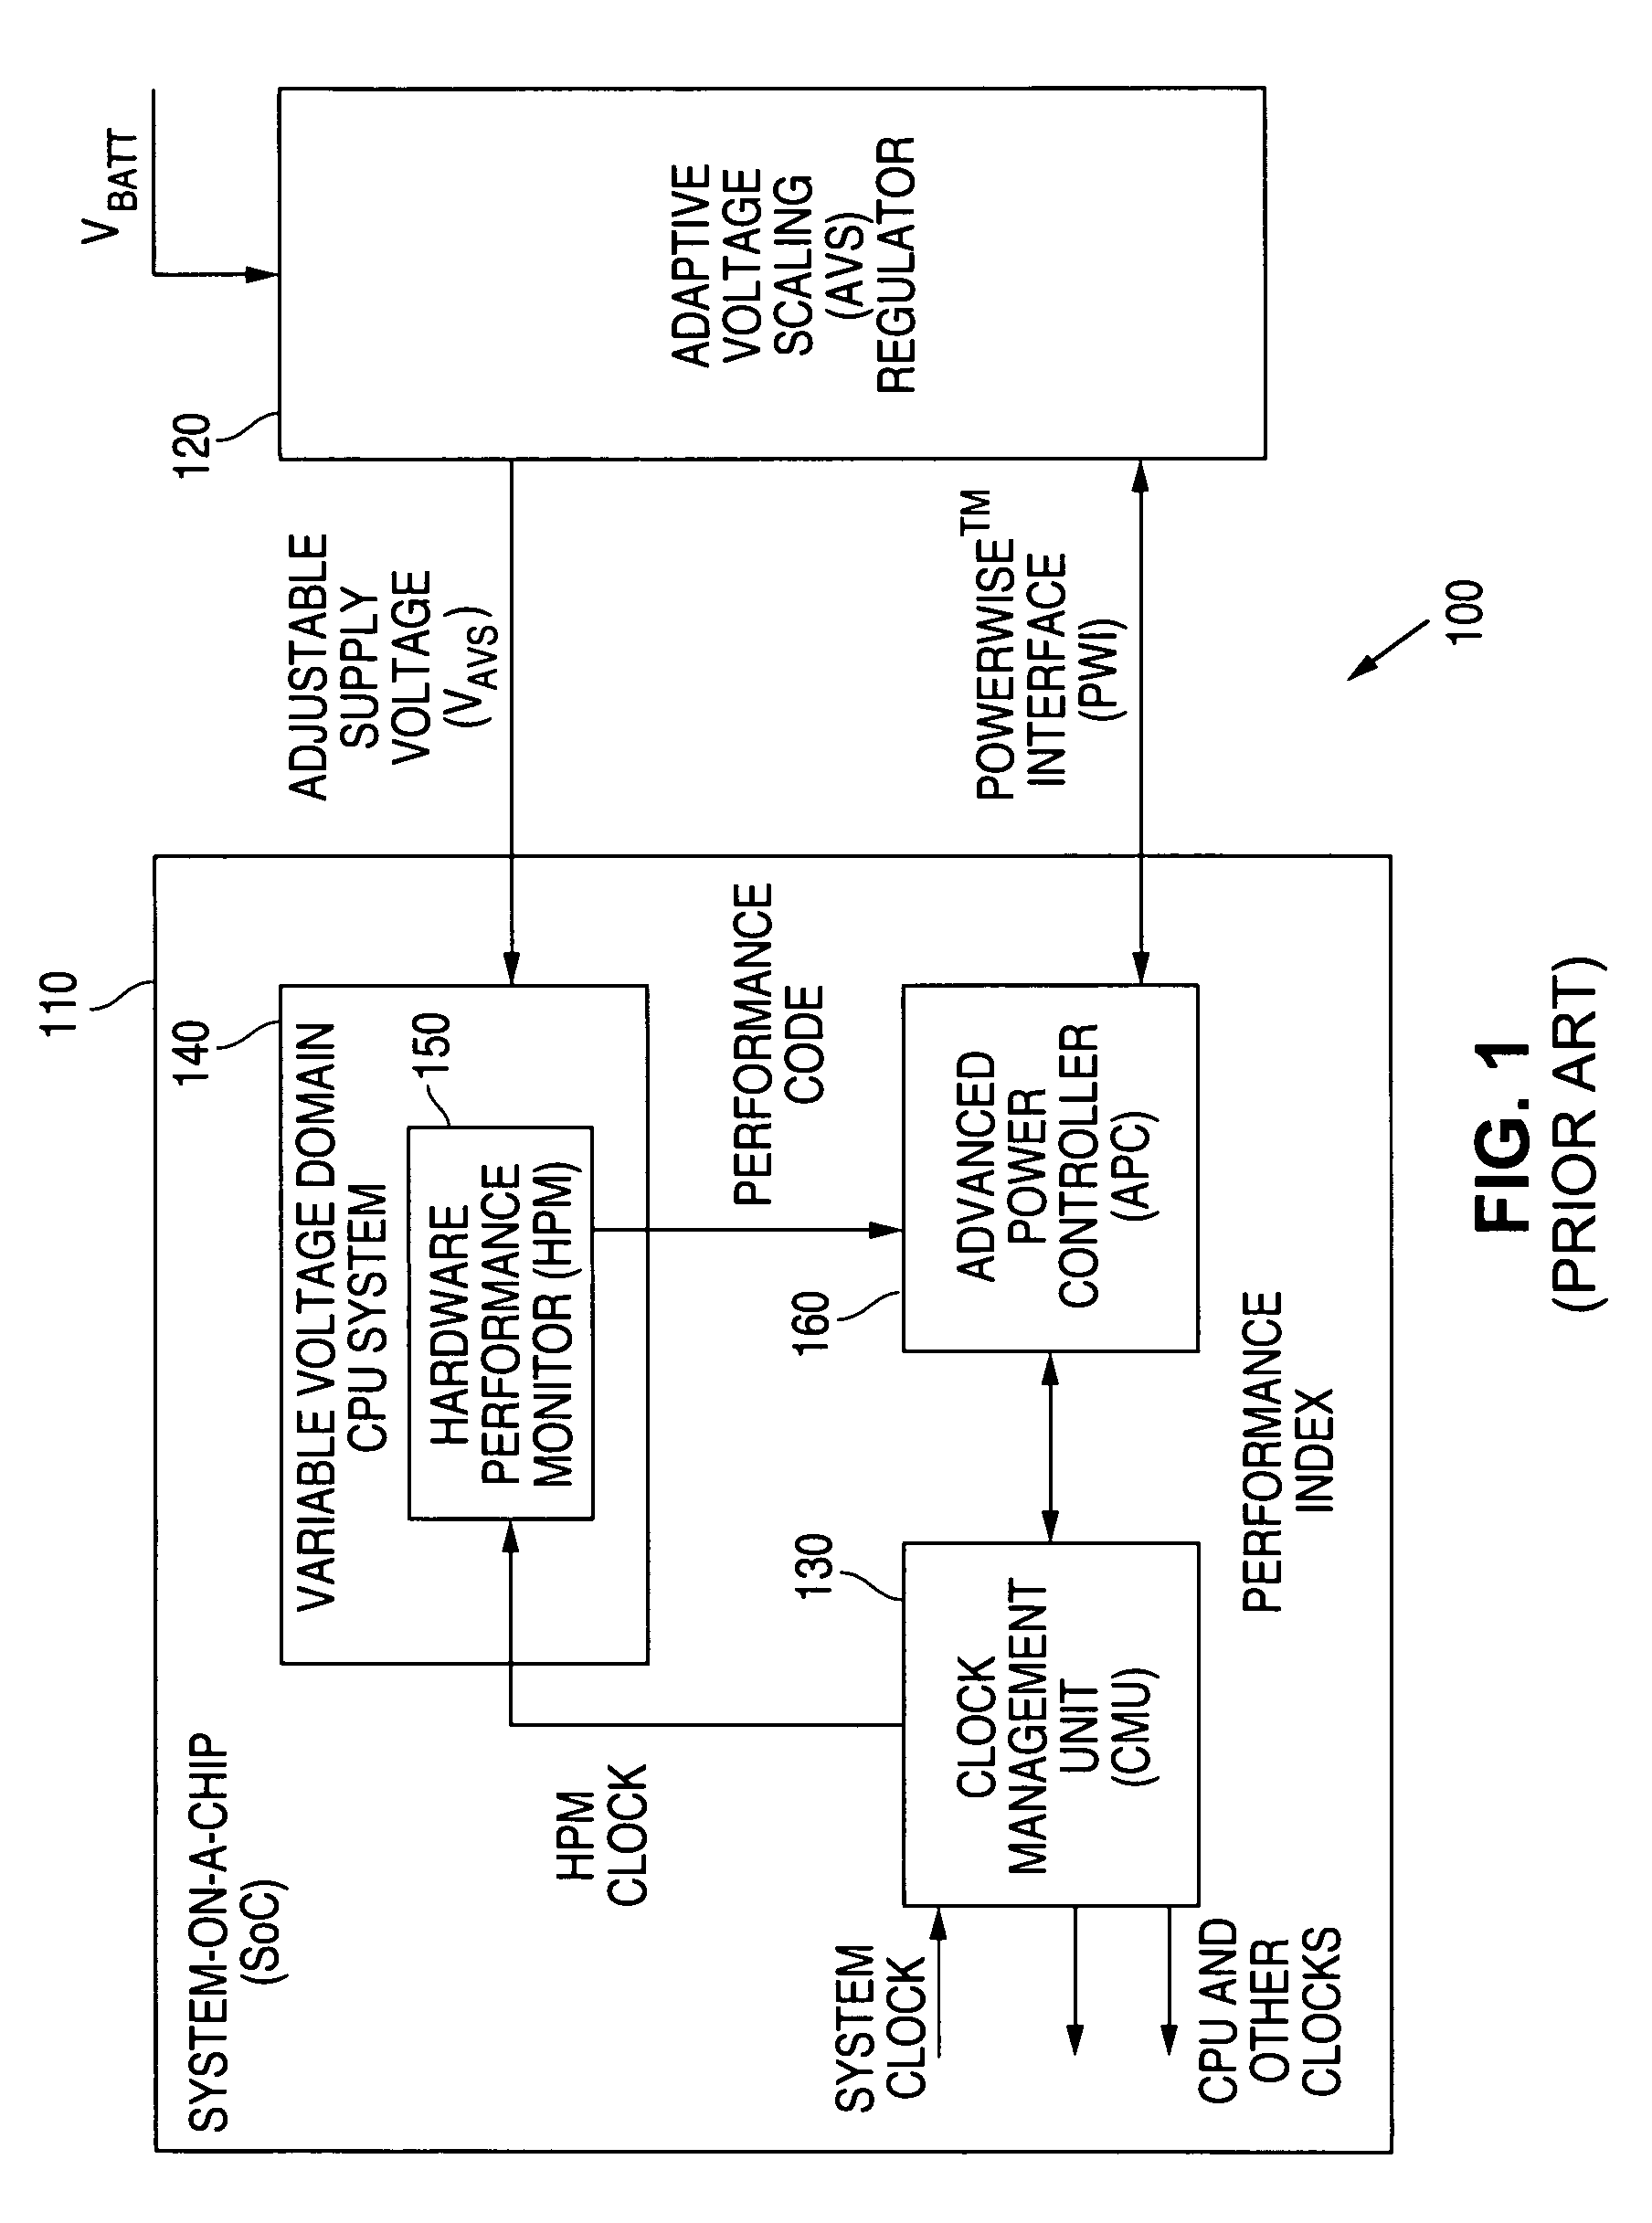 System and method for rapidly increasing a rising slew rate of an adjustable supply voltage in adaptive voltage scaling